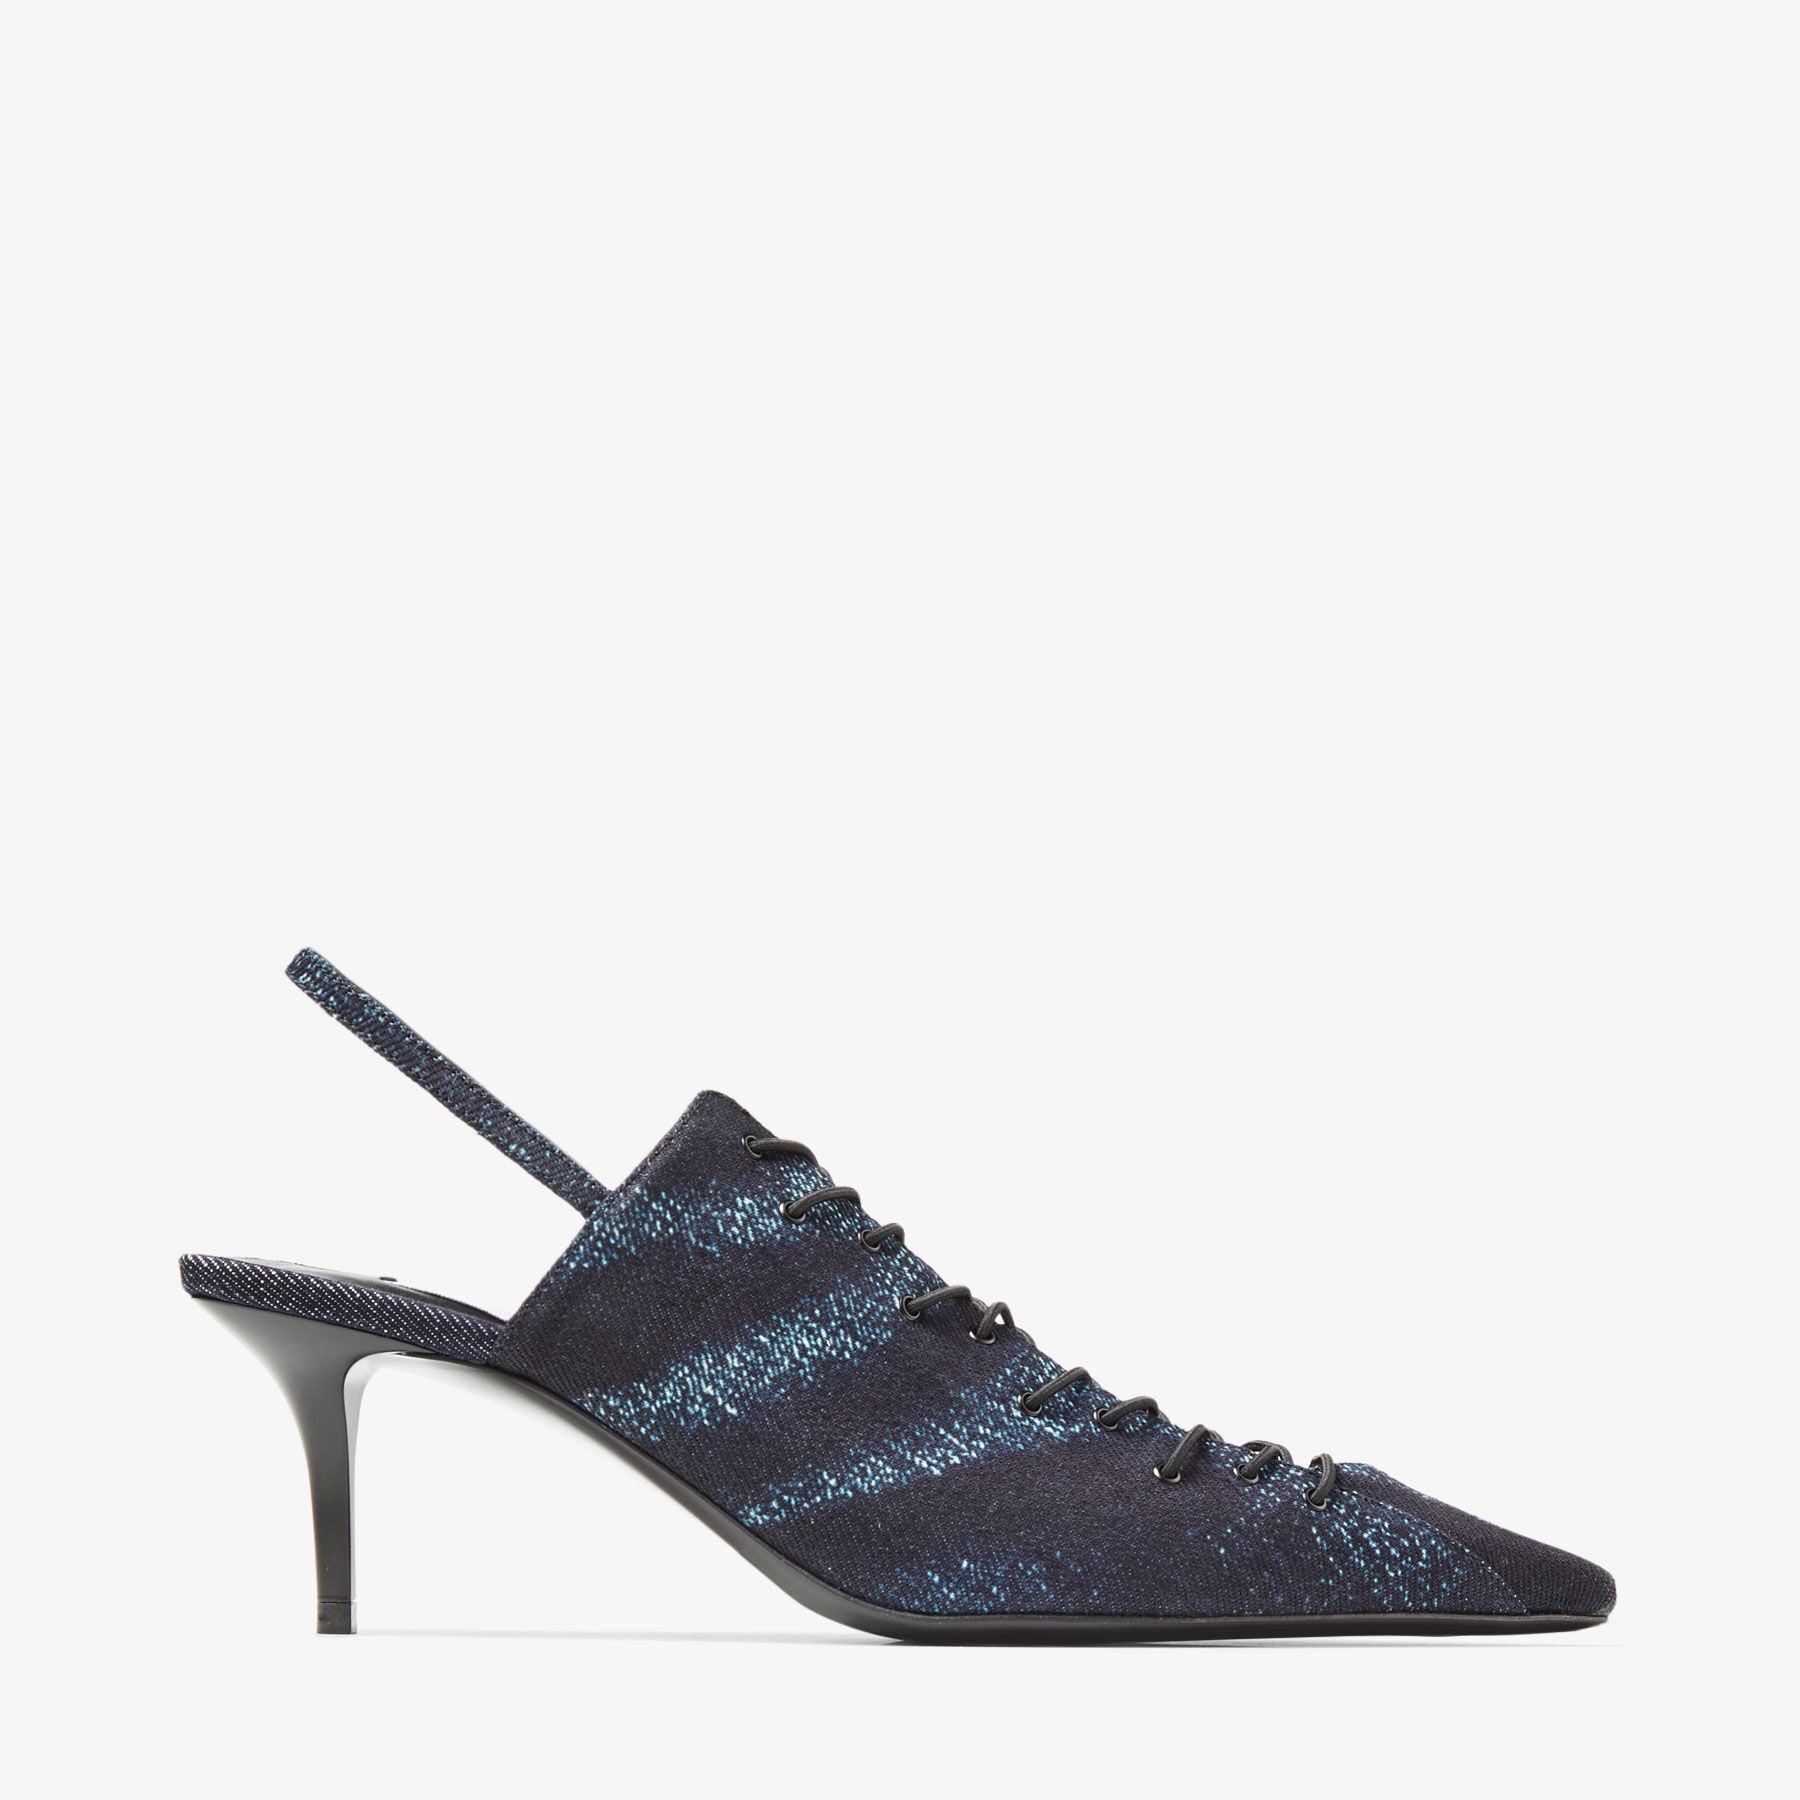 Jimmy Choo / Jean Paul Gaultier Sling Back 60
Denim Print Fabric Sling Back Pumps with Laces - 1